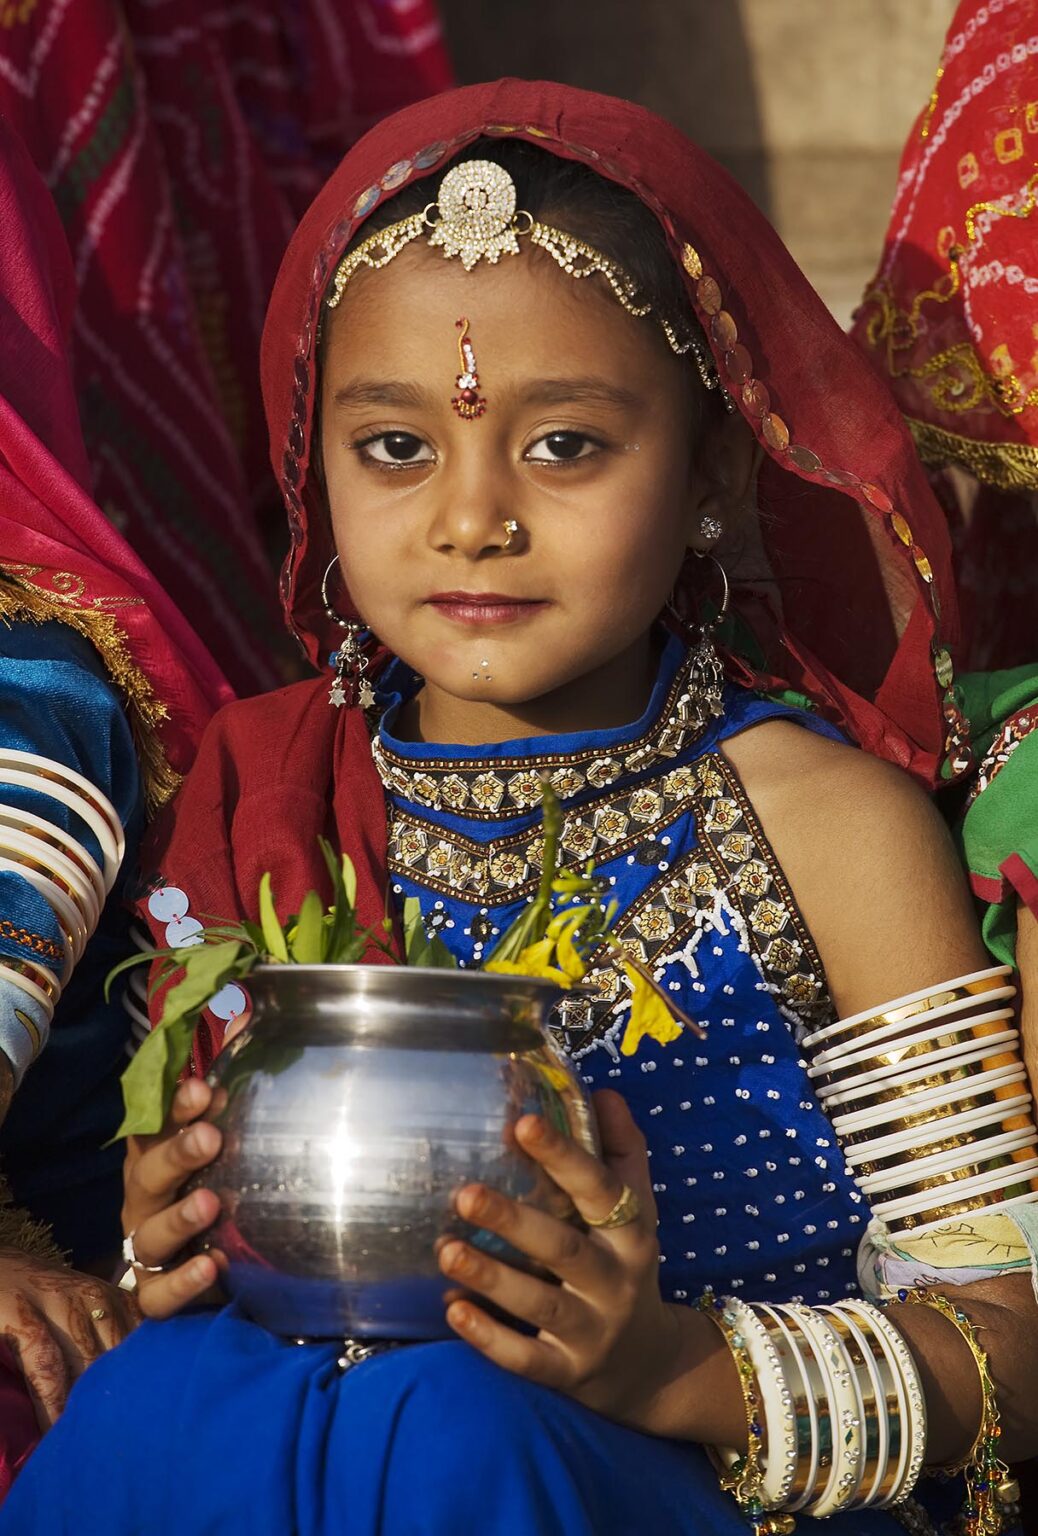 A Rajasthani girl dressed in her finest clothing and jewelry to celebrate the GANGUR FESTIVAL also know as the MEWAR FESTIVAL - UDAIPUR, RAJASTHAN, INDIA